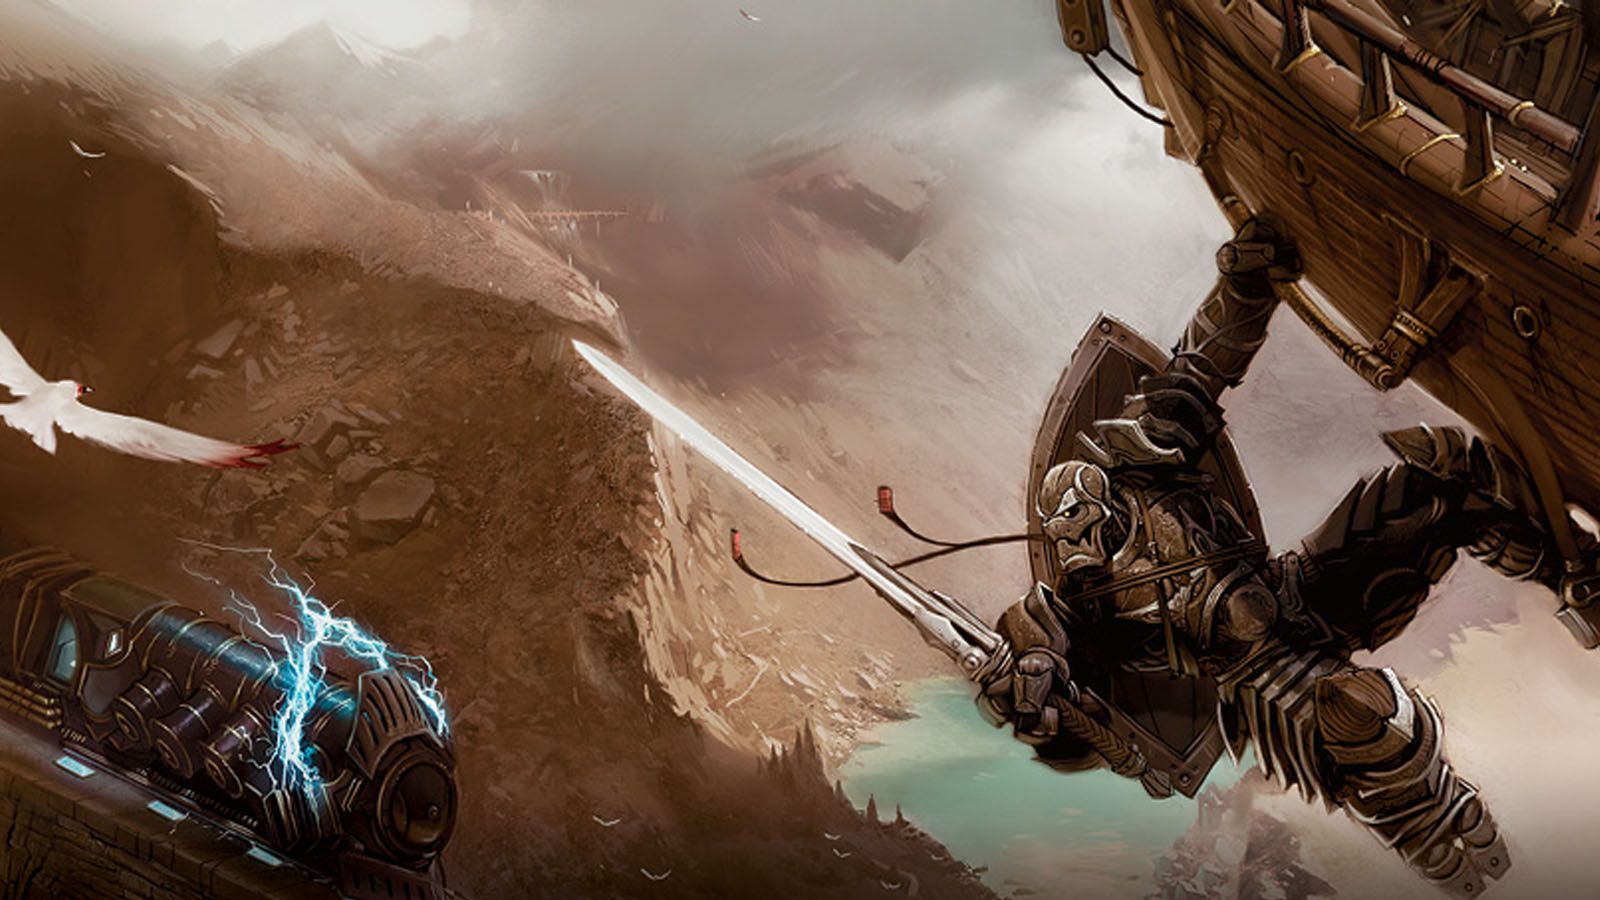 News Help Shape The Future Today In Eberron Rising From The Last War. New Background, War, Fantasy Characters